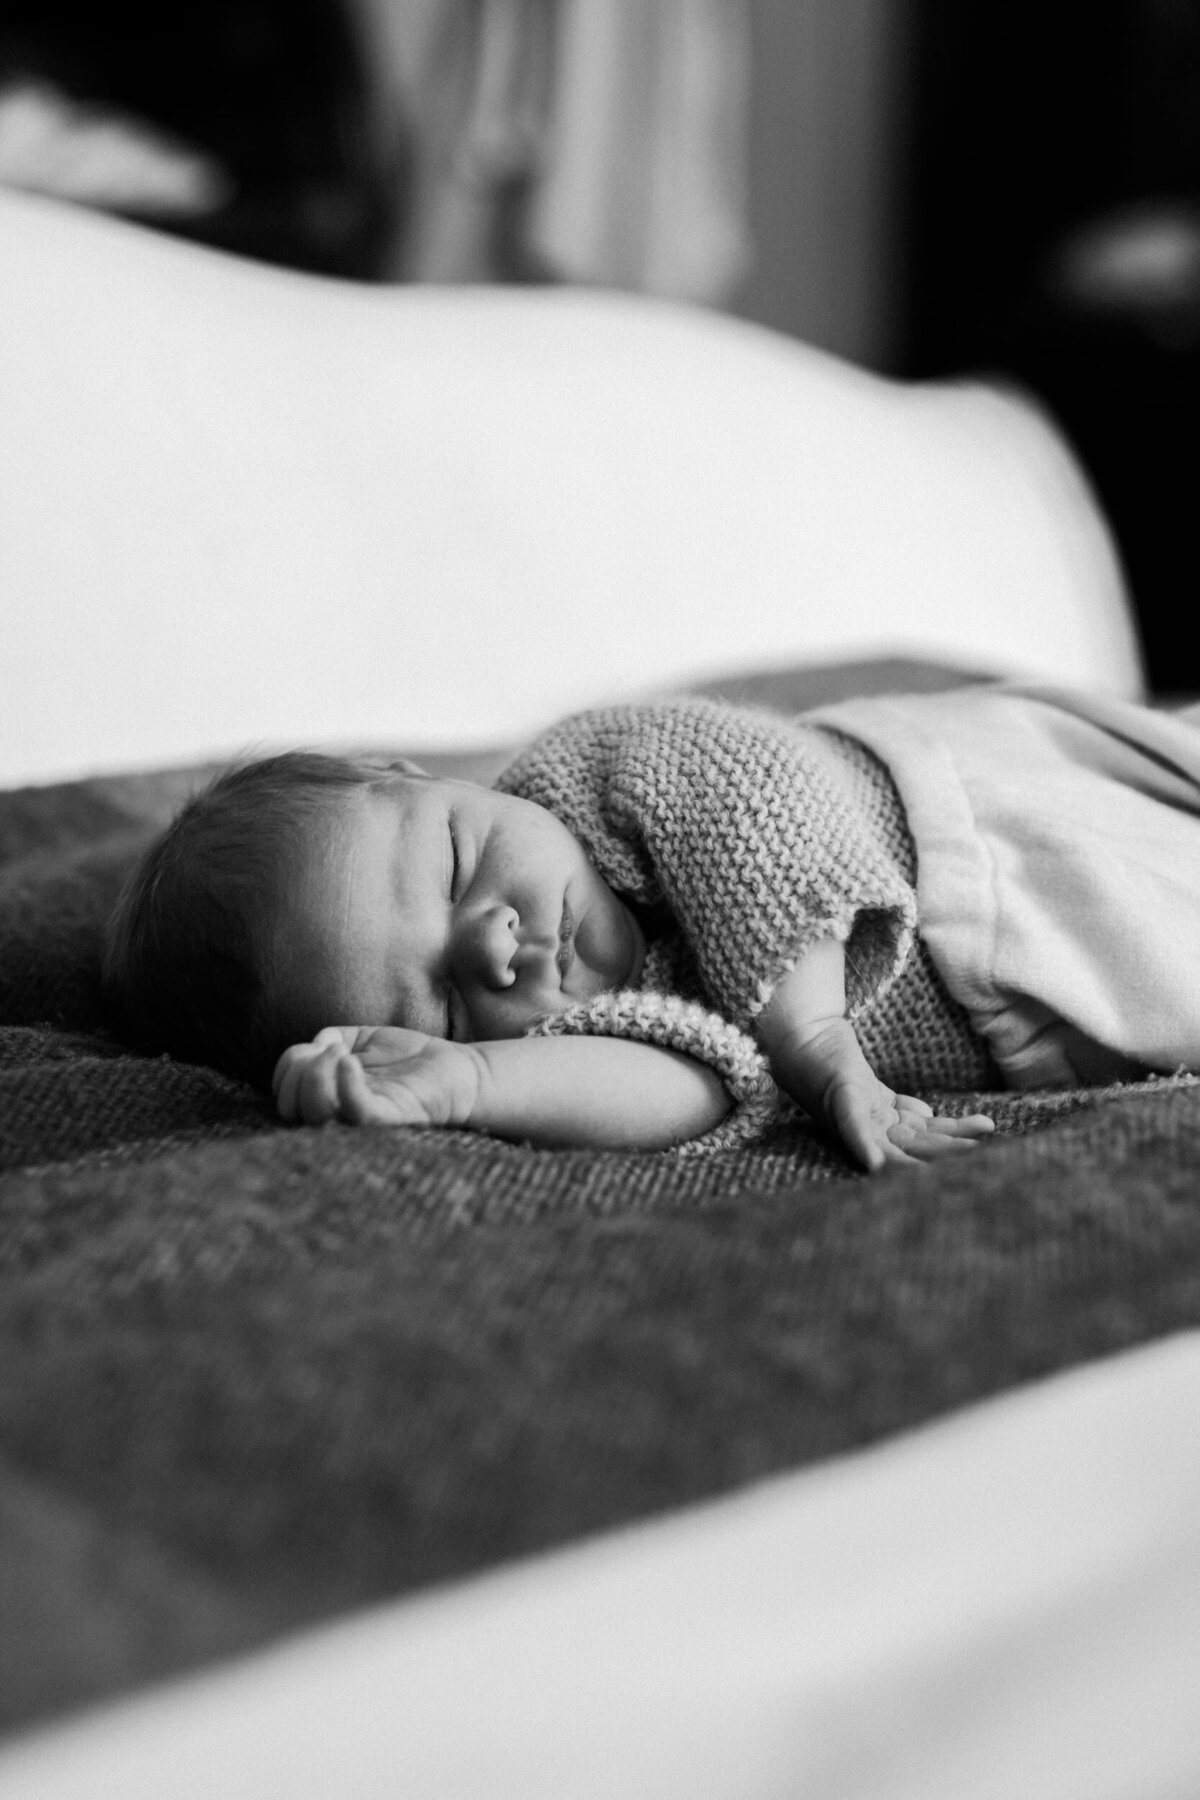 Sleeping baby laying on wool blanket in bed at home